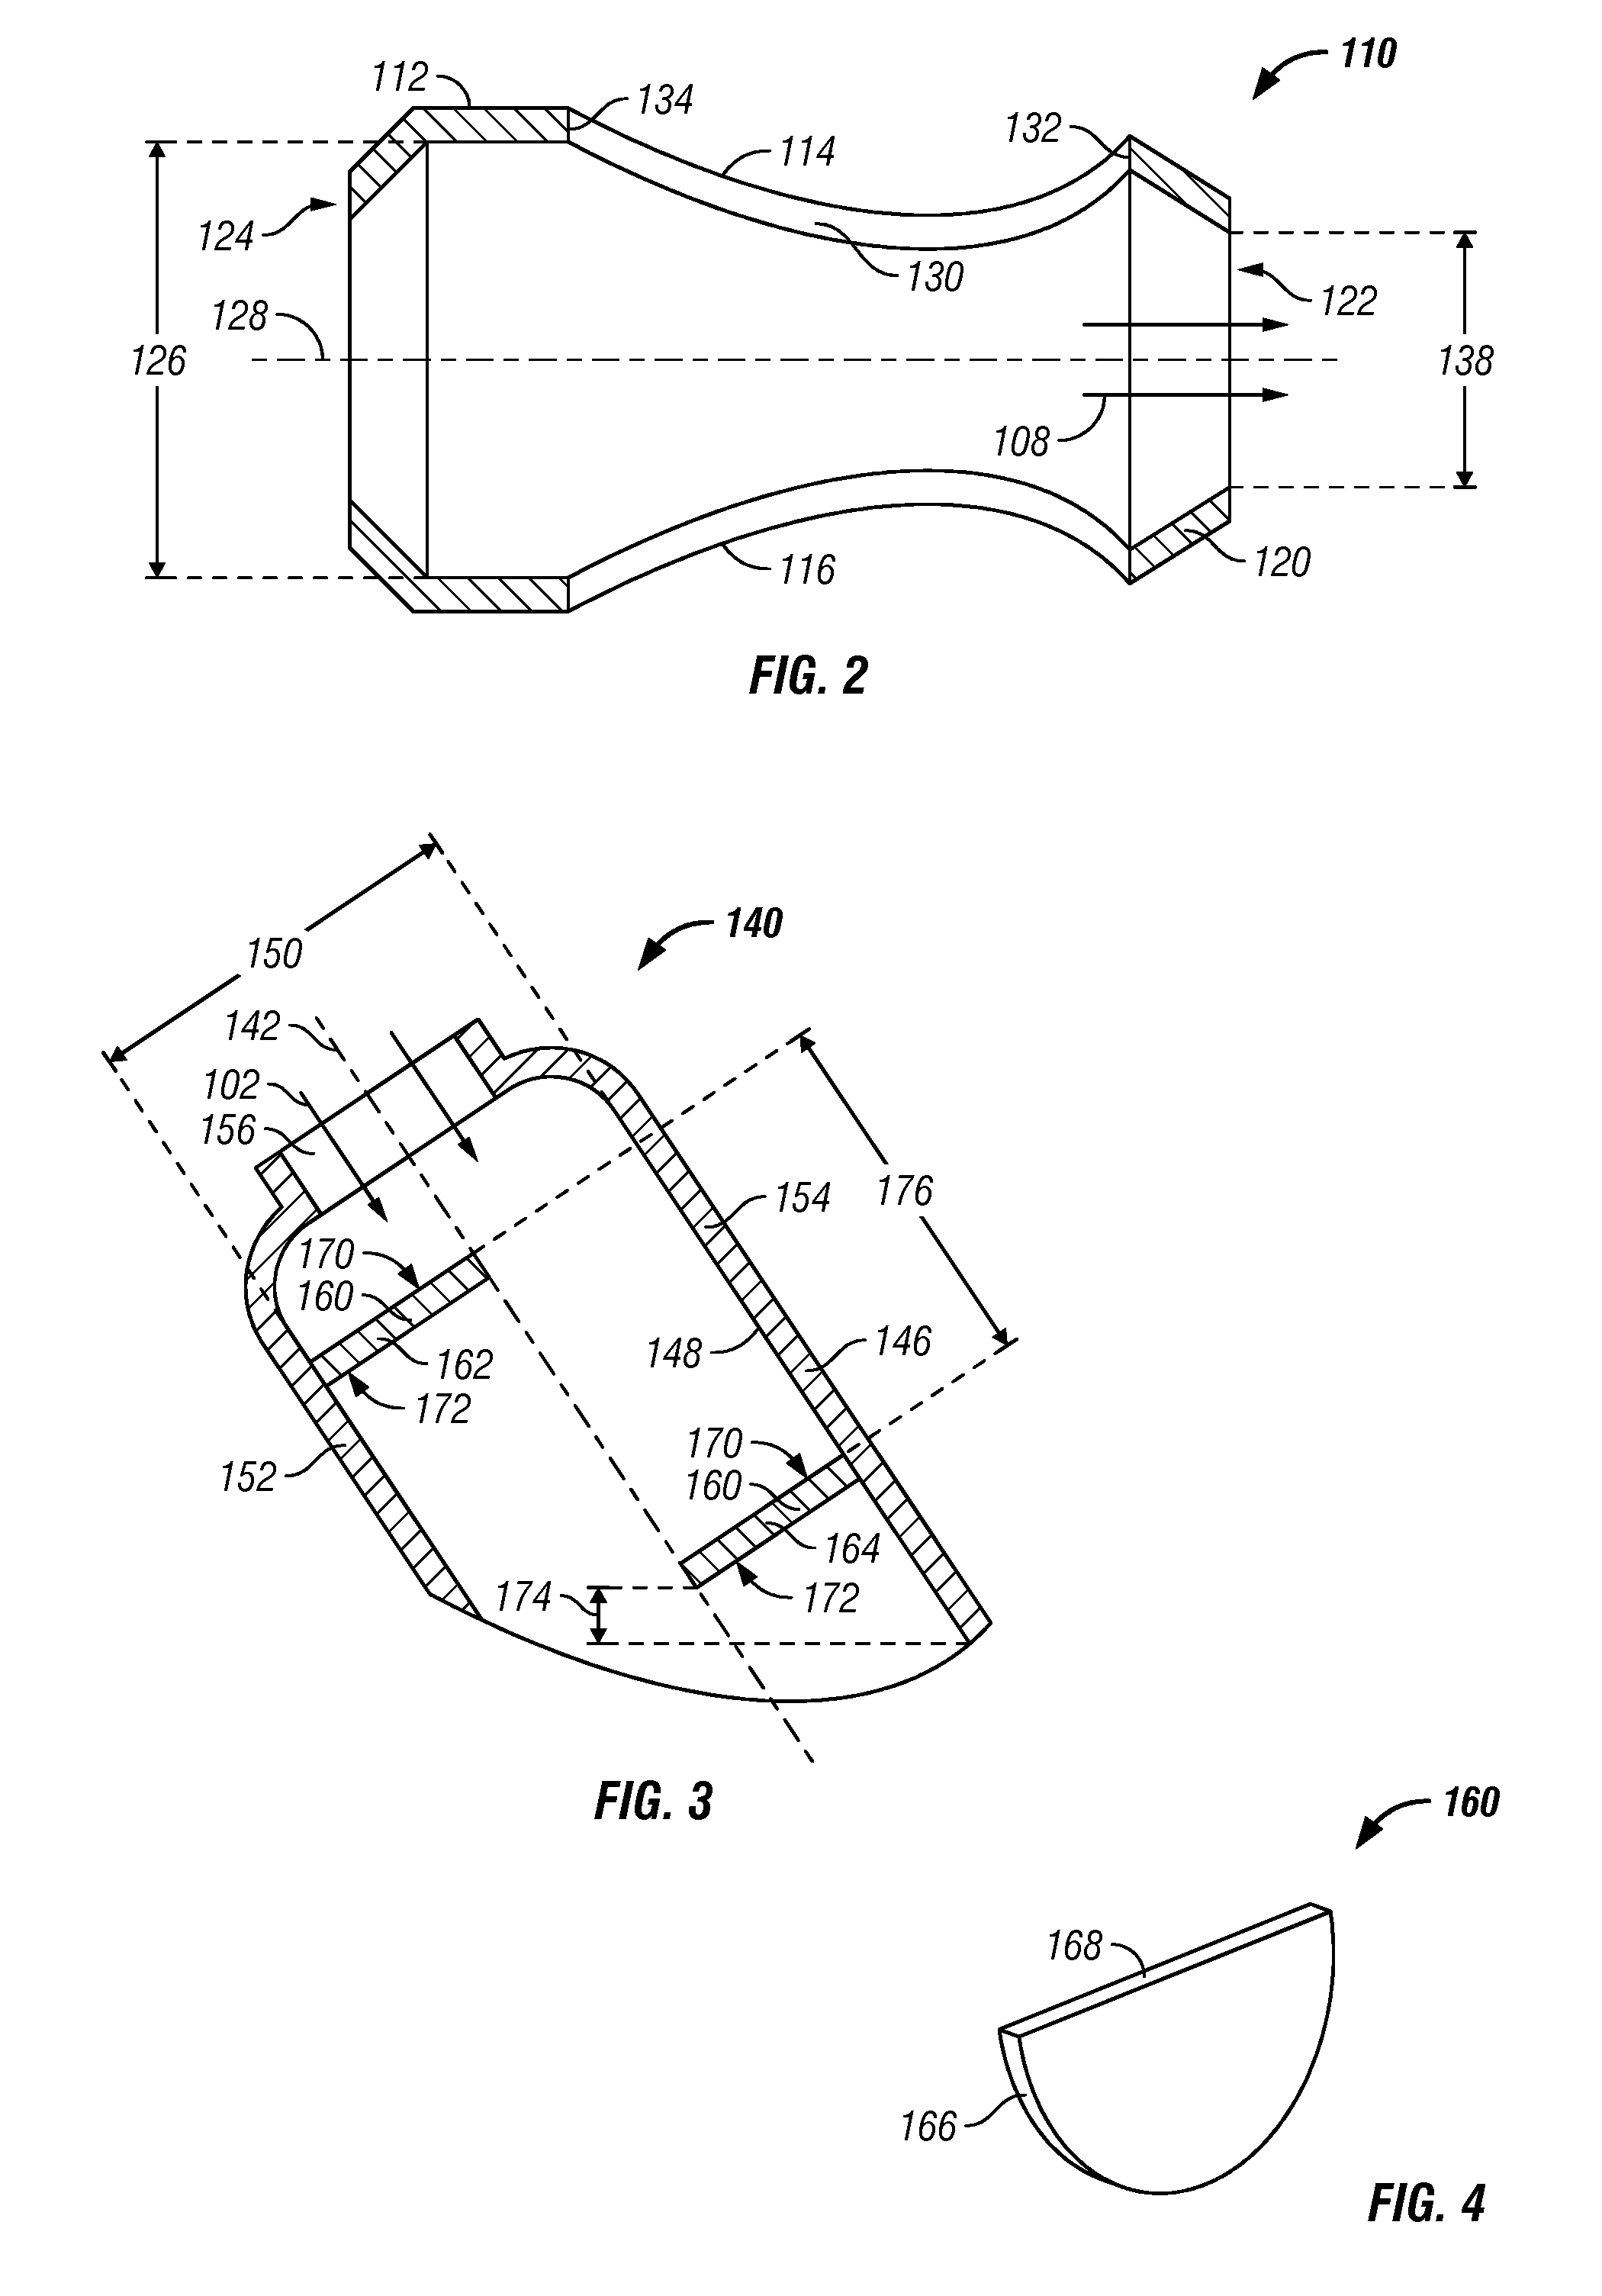 Apparatus and Method for Homogenizing Two or More Fluids of Different Densities